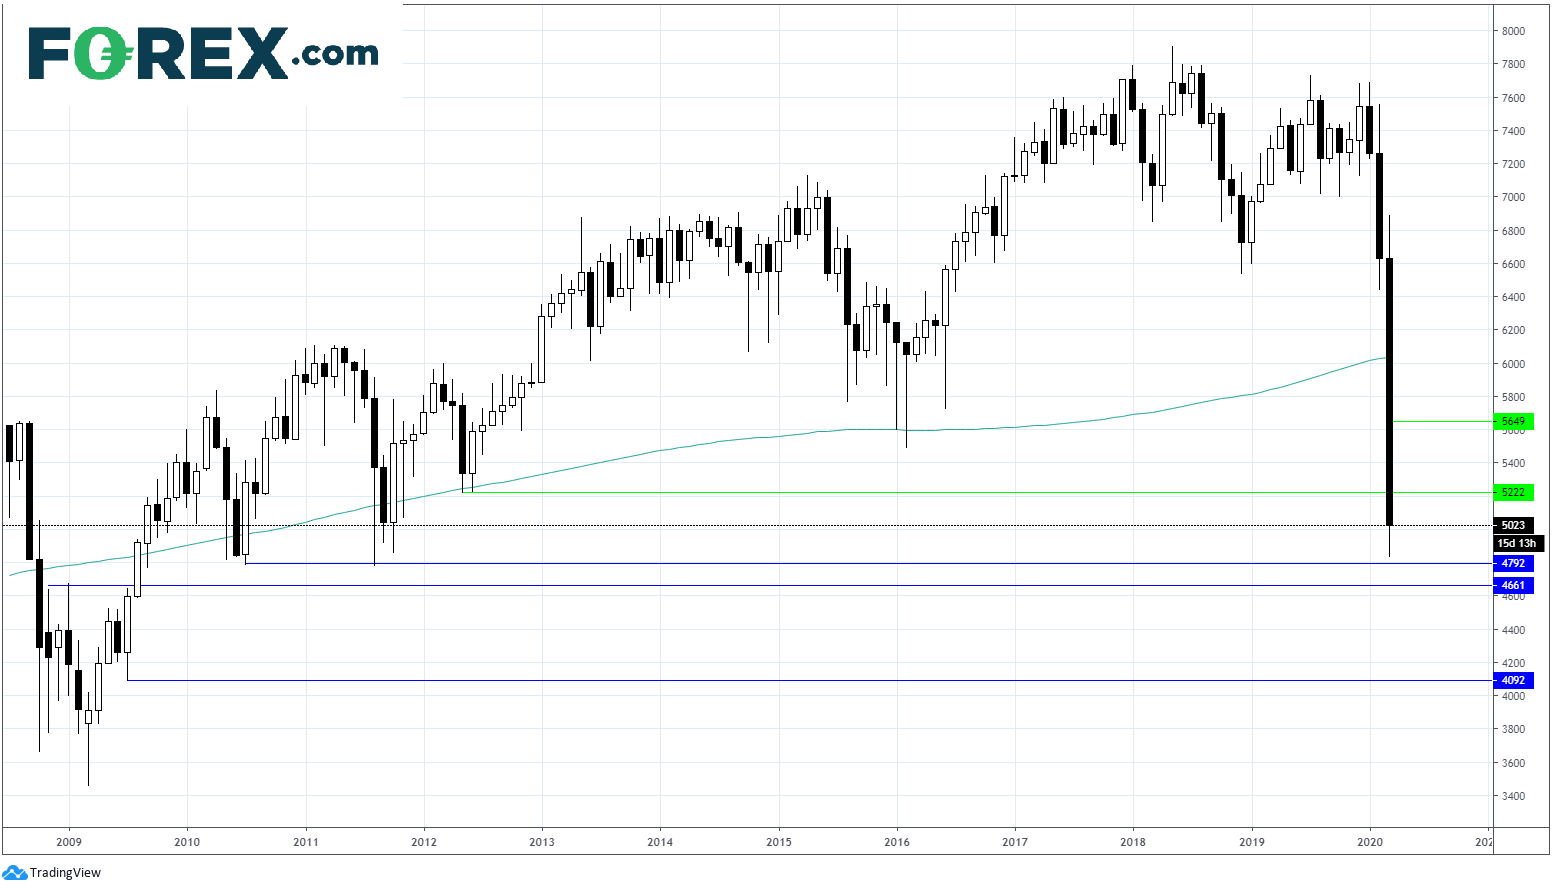 Market chart showing strong fall. Published in March 2020 by FOREX.com